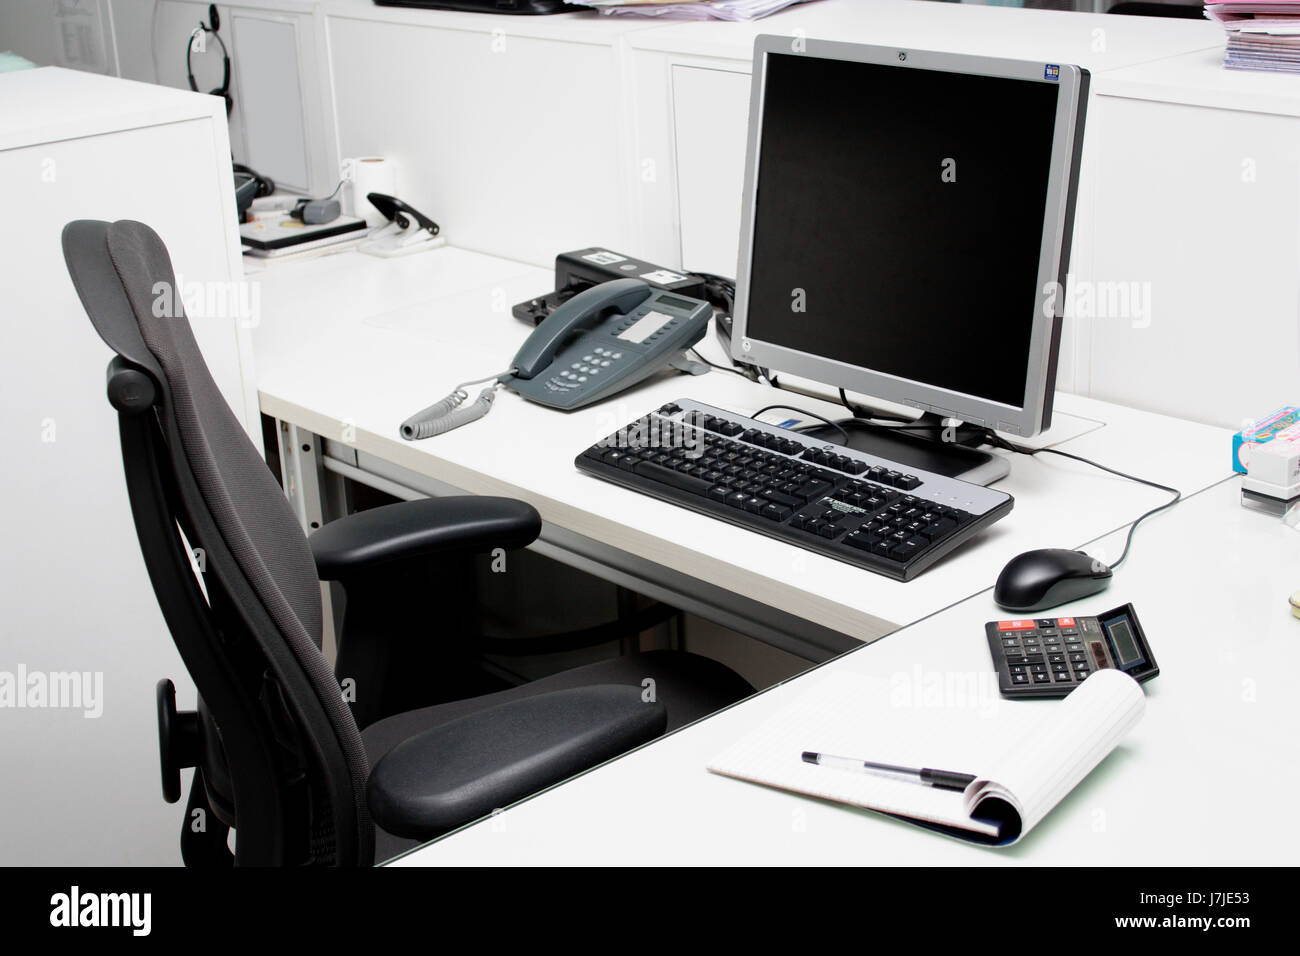 A Workplace Or Desk In Office With Monitor Phone Keyboard Mouse